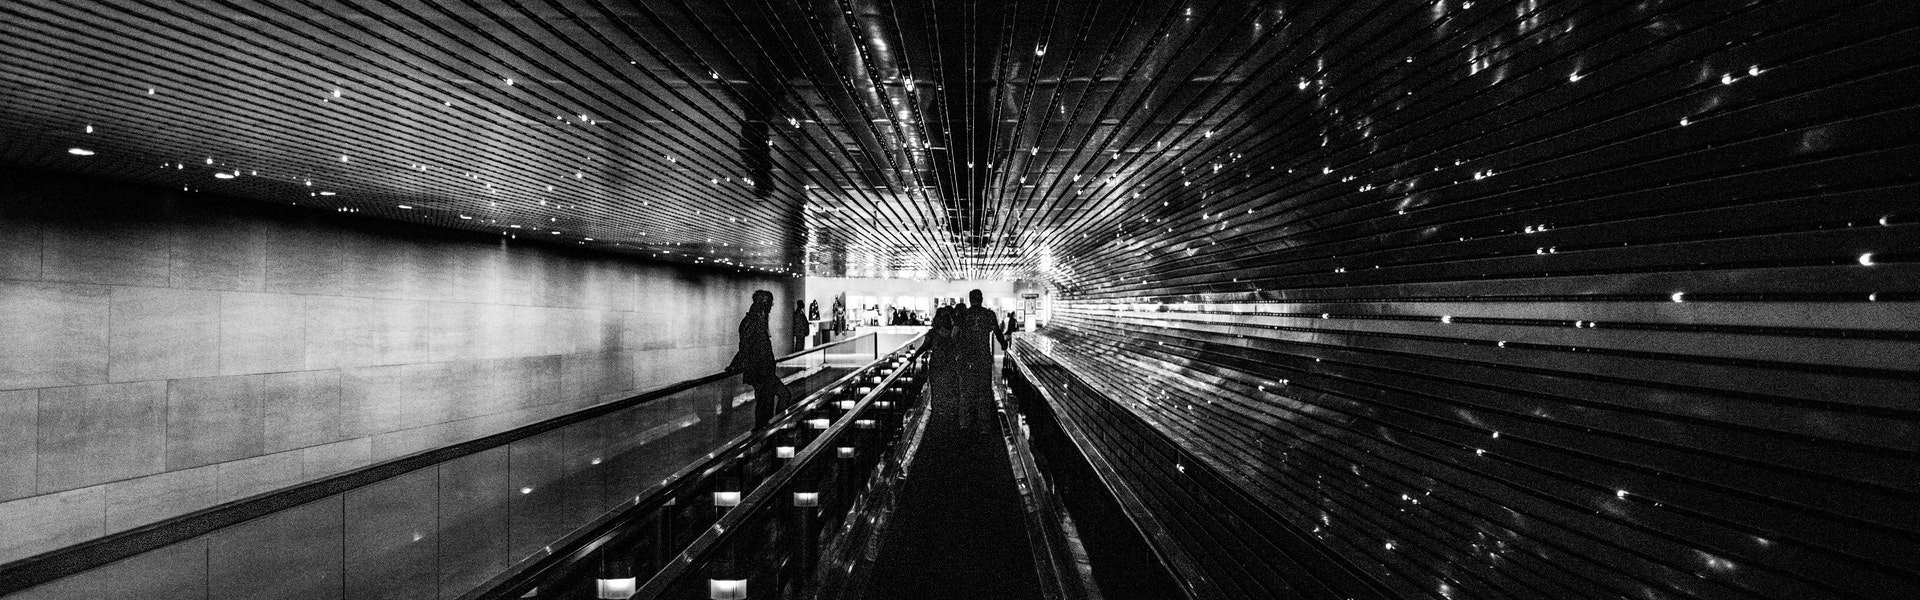 Black and White Image of People Mover